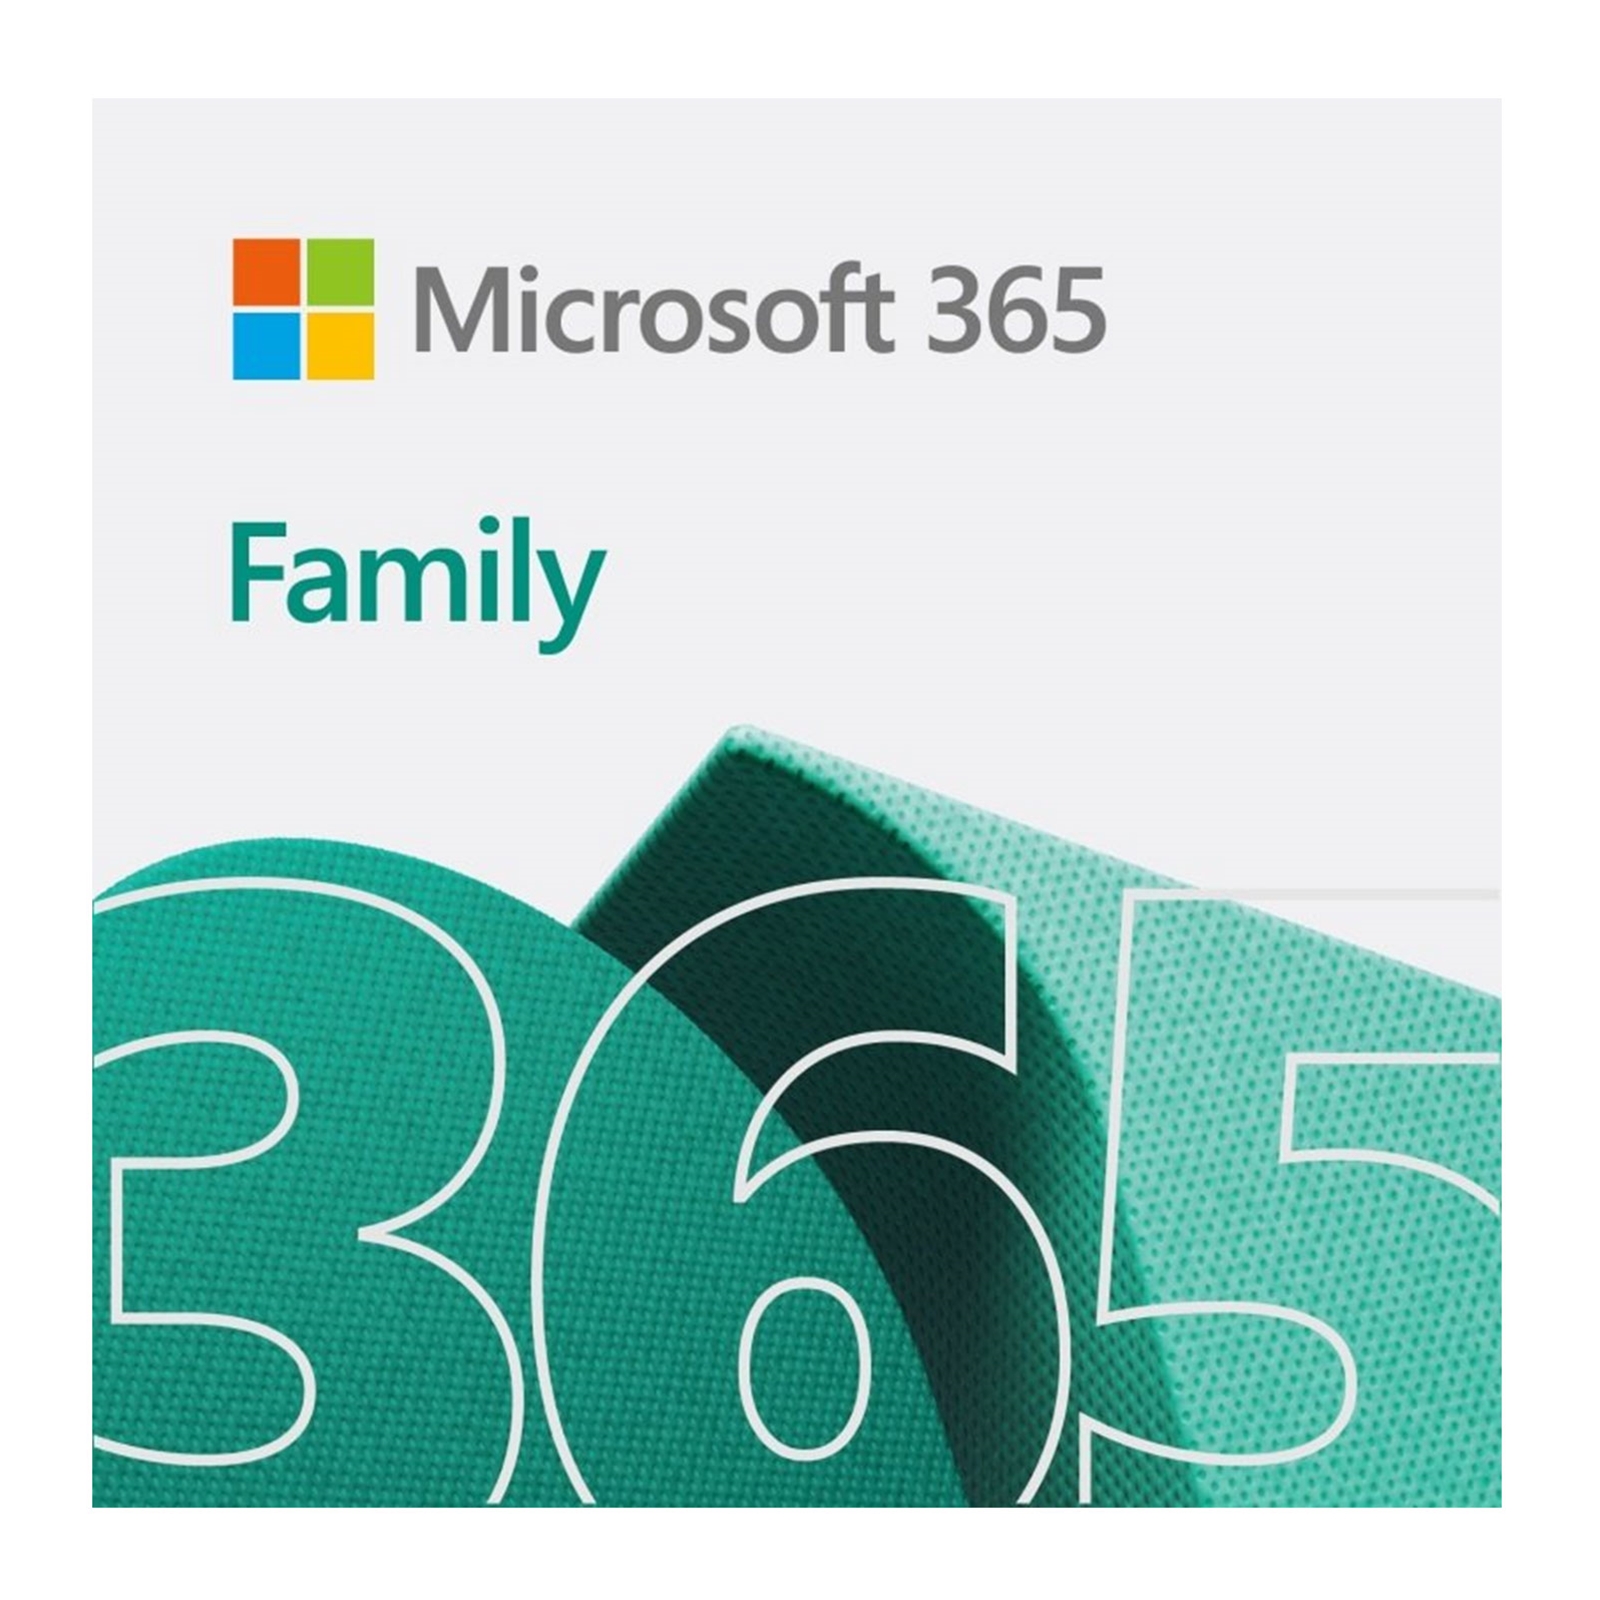 Microsoft 365 Family Medialess 2021 Latest Version - 1 Year Subscription 6 Users  - Electronic Download ESD